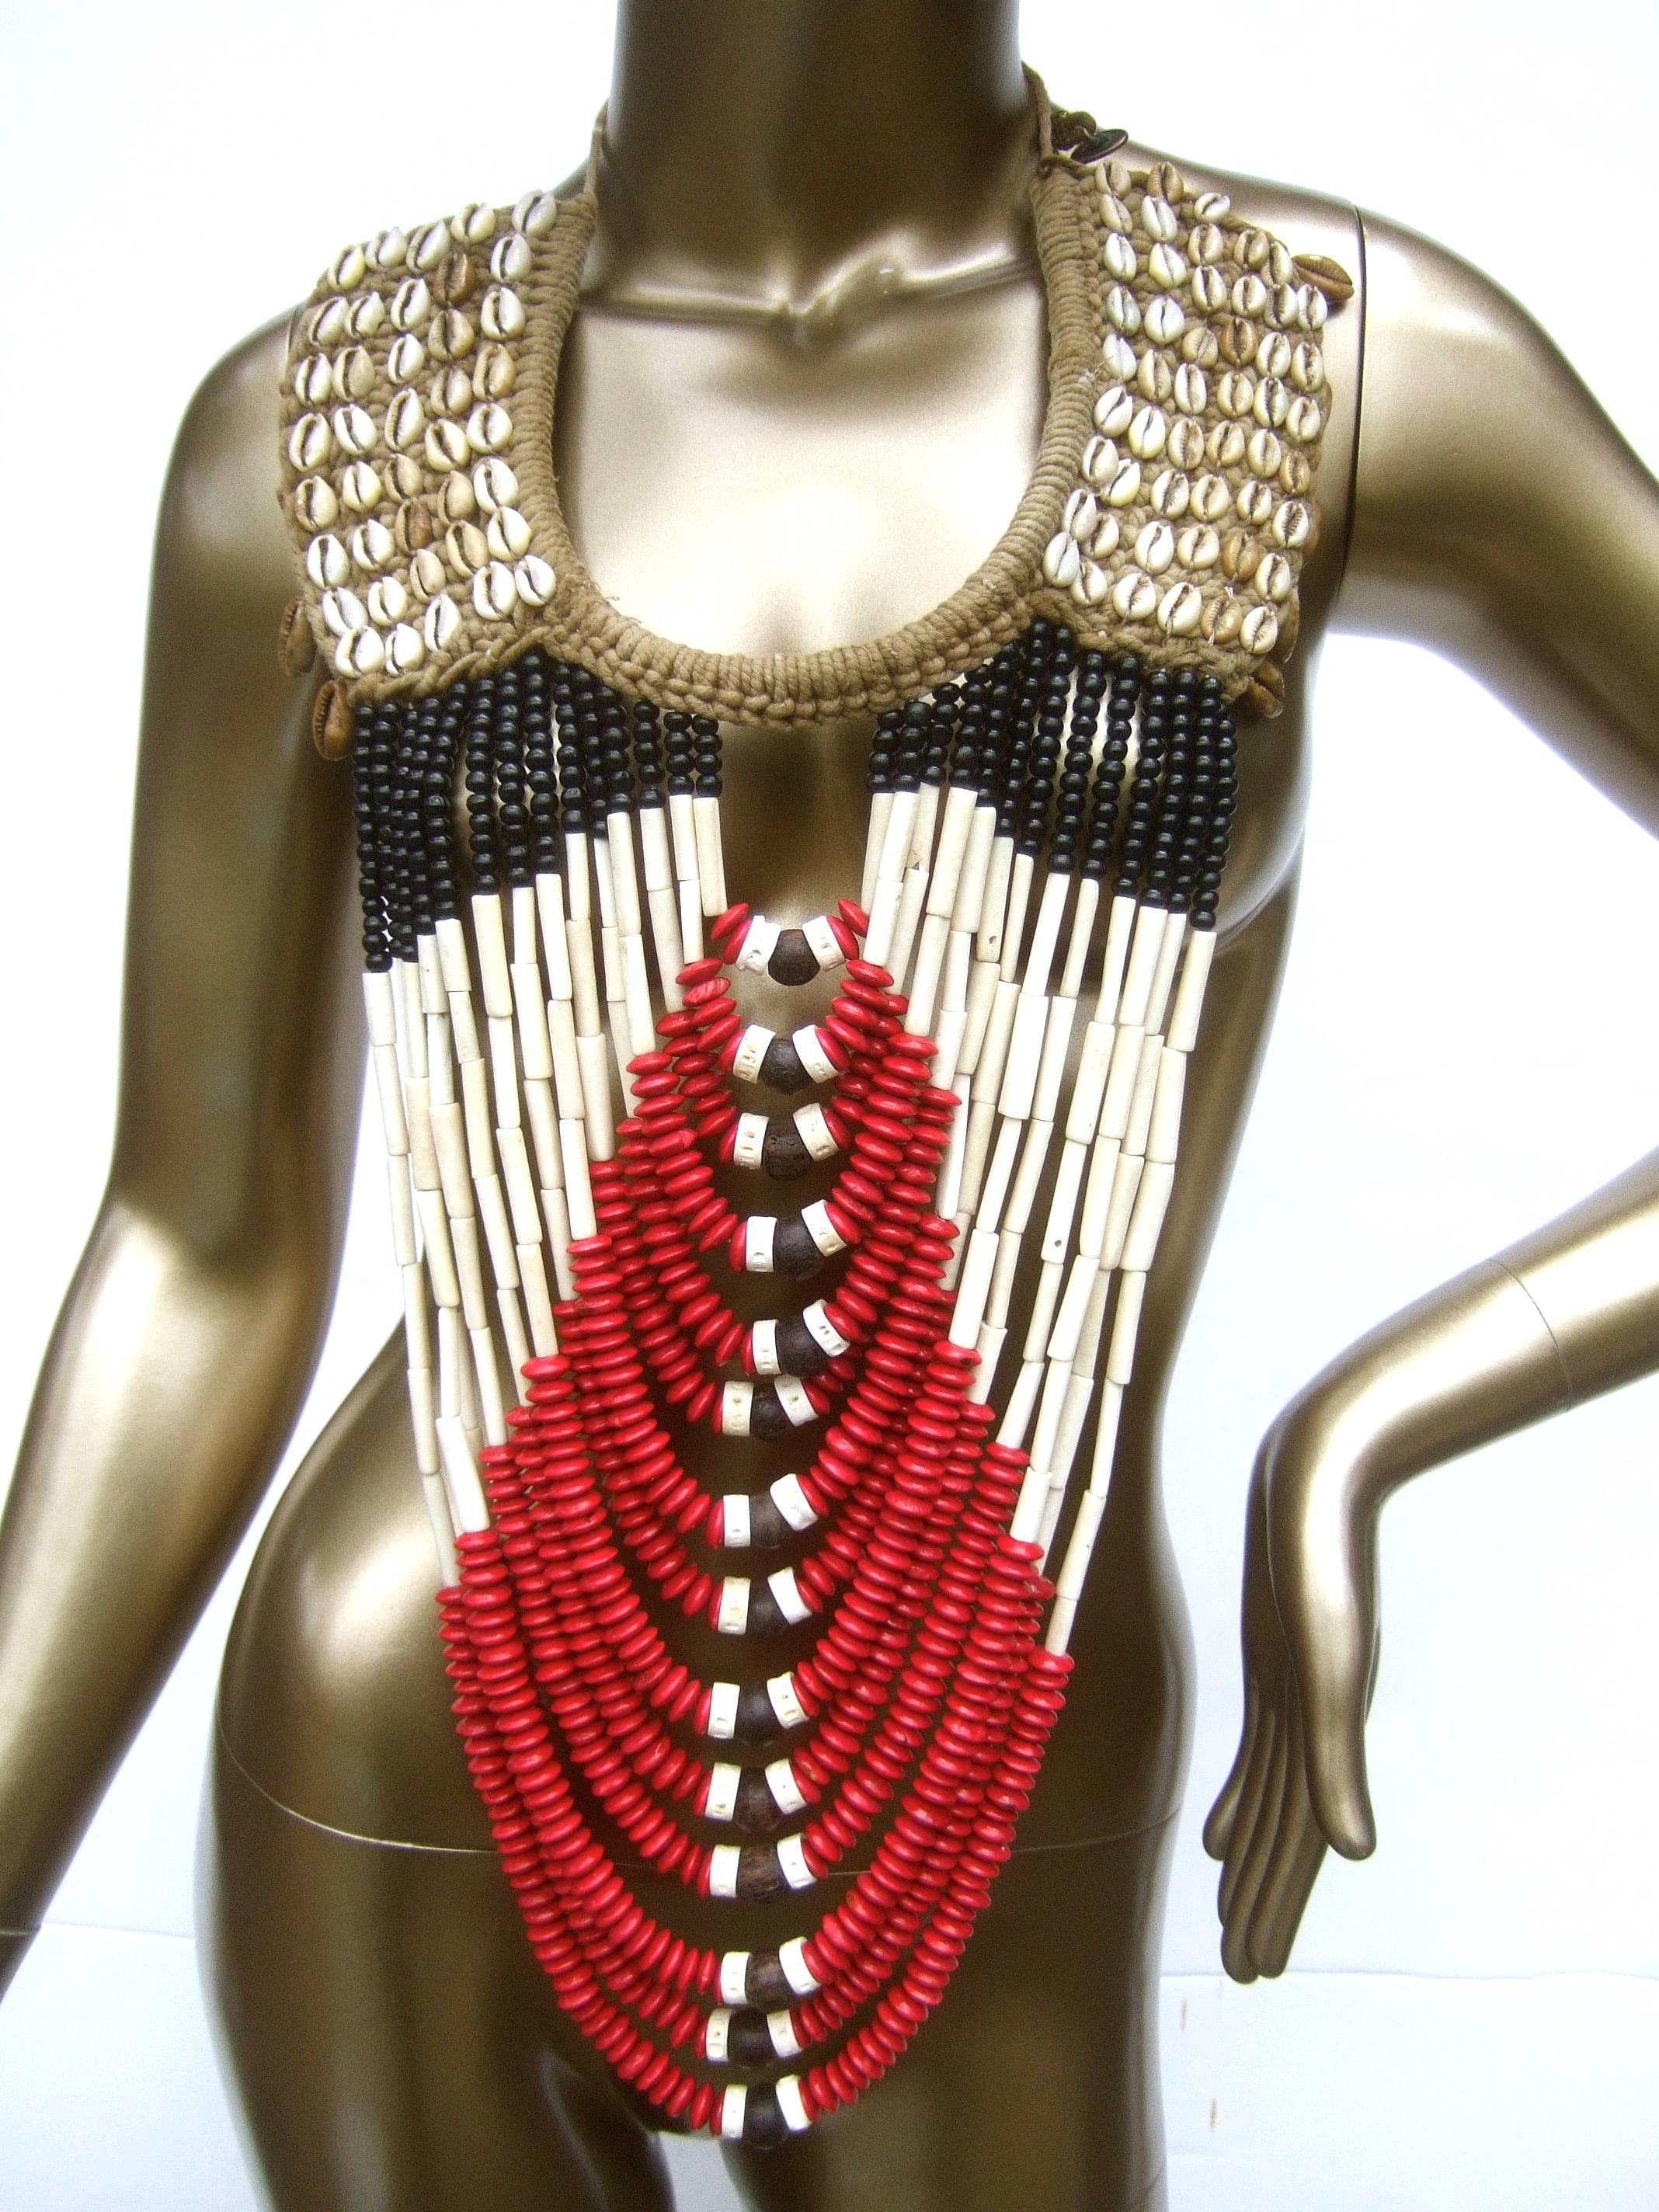 Massive artisan ethnic tribal beaded statement necklace c 1980s
The huge scale handmade artisan necklace is comprised of
fourteen strands of graduated wood beads in red and black enamel  
Juxtaposed with elongated cylinder shaped beads in antler